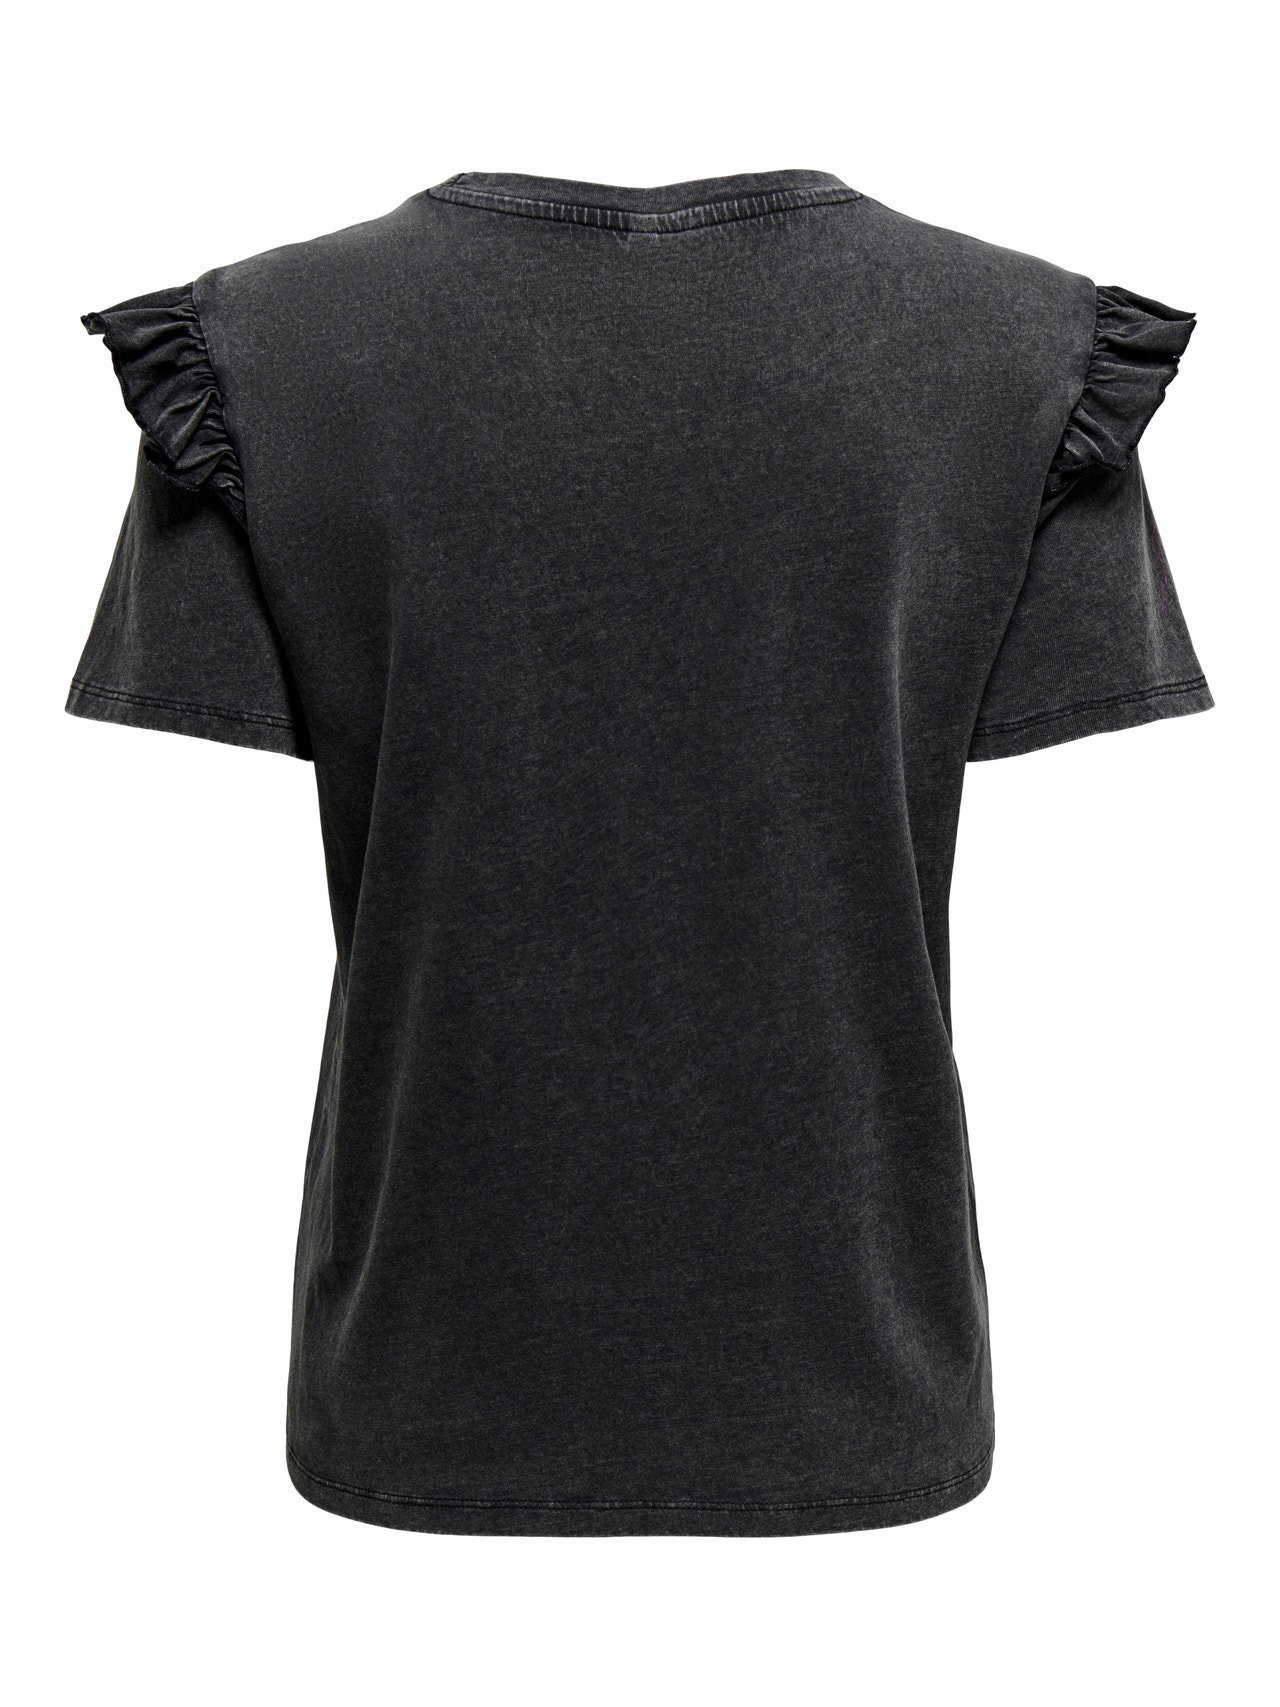 ONLY O-neck t-shirt with print and frills -Black - 15303188